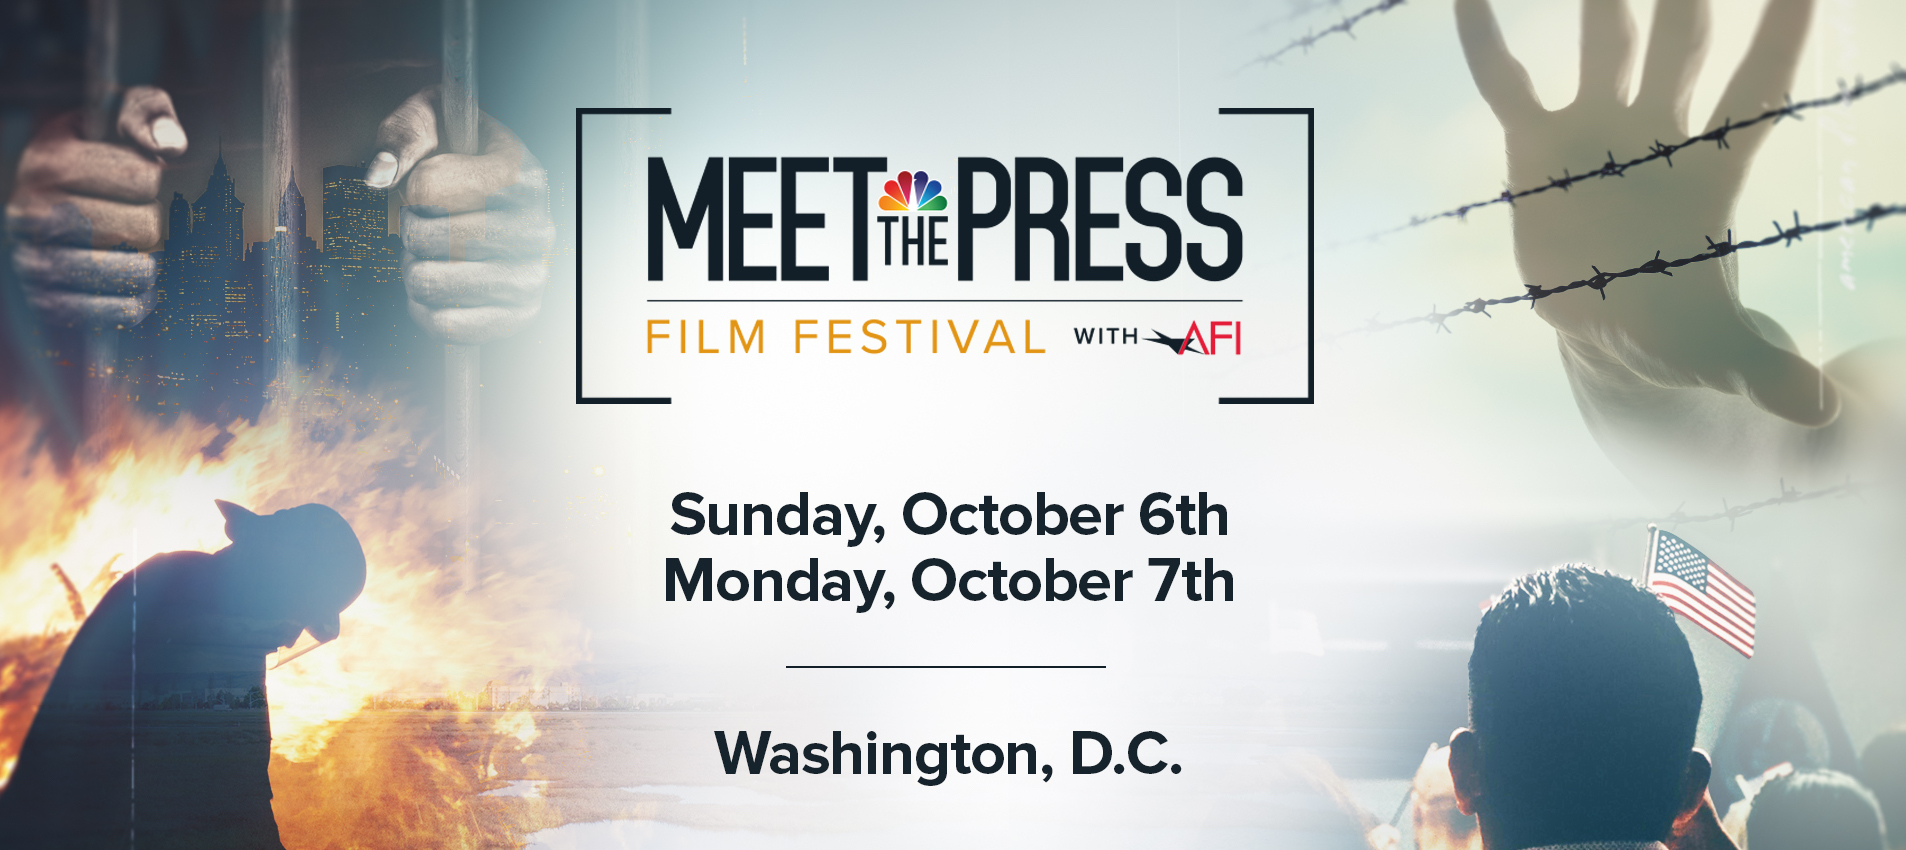 Meet the Press Film Festival with AFI to Showcase More than 20